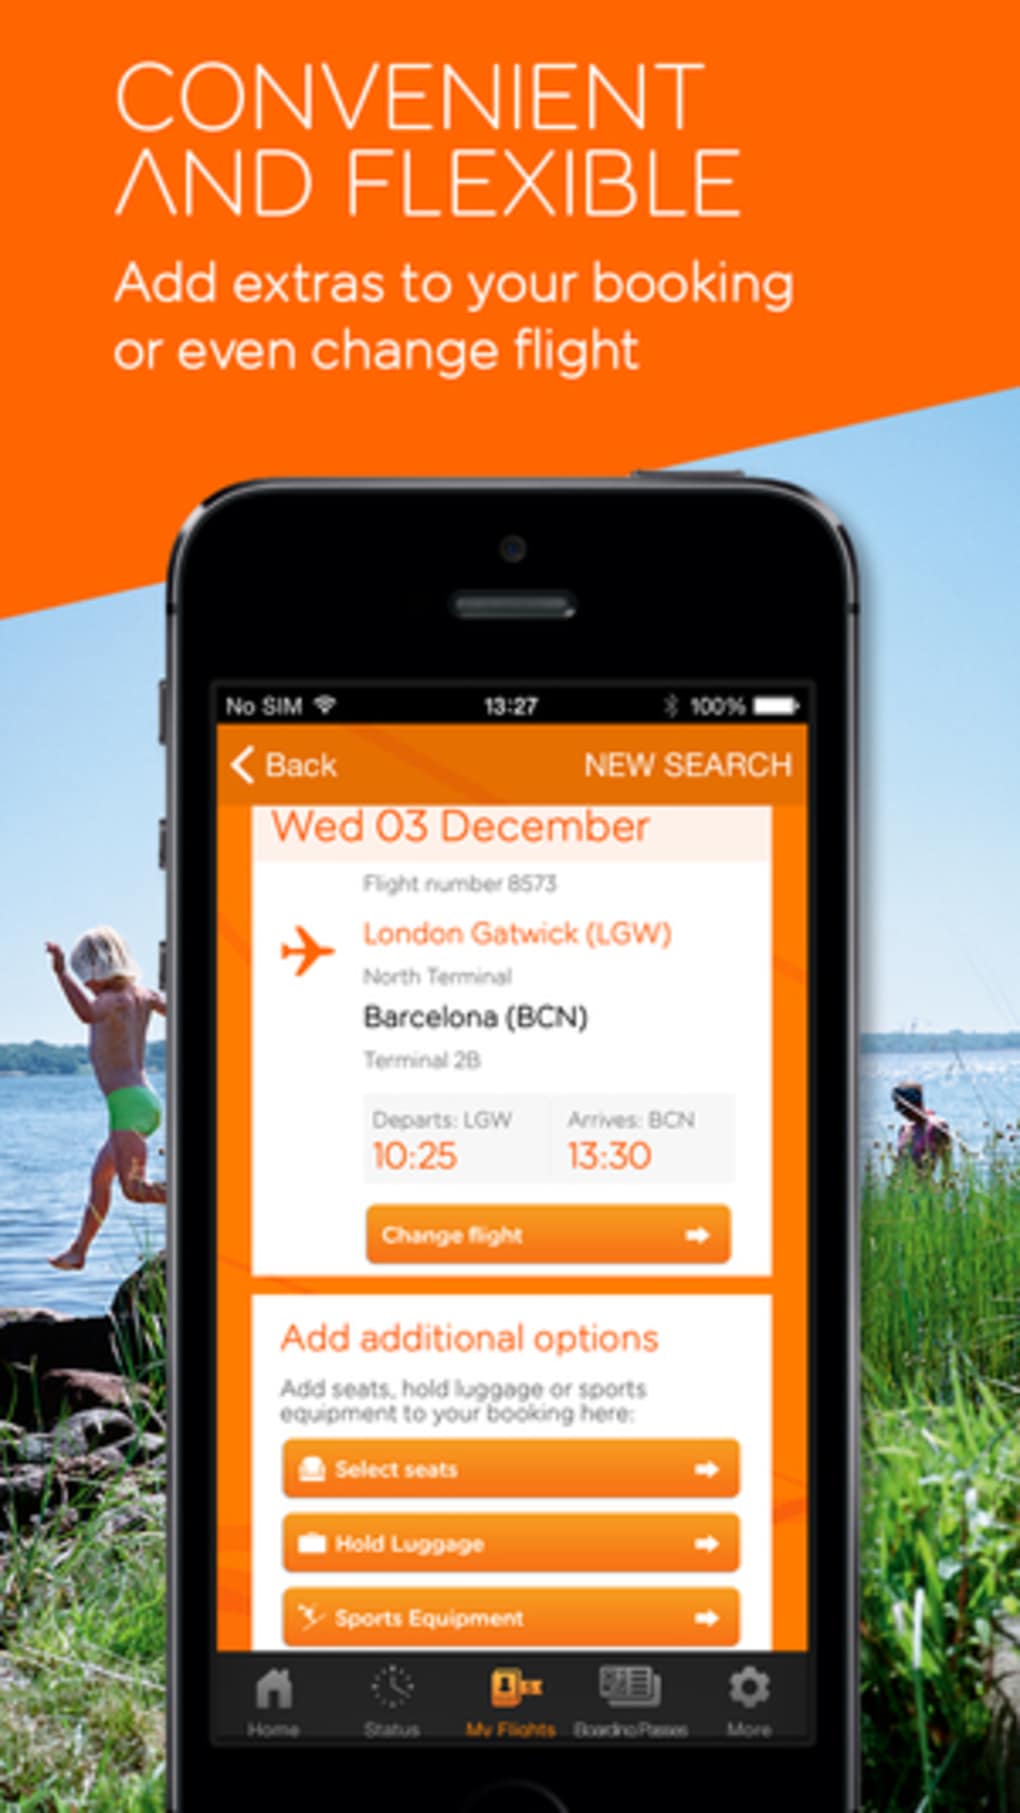 easyjet-travel-app-for-iphone-download